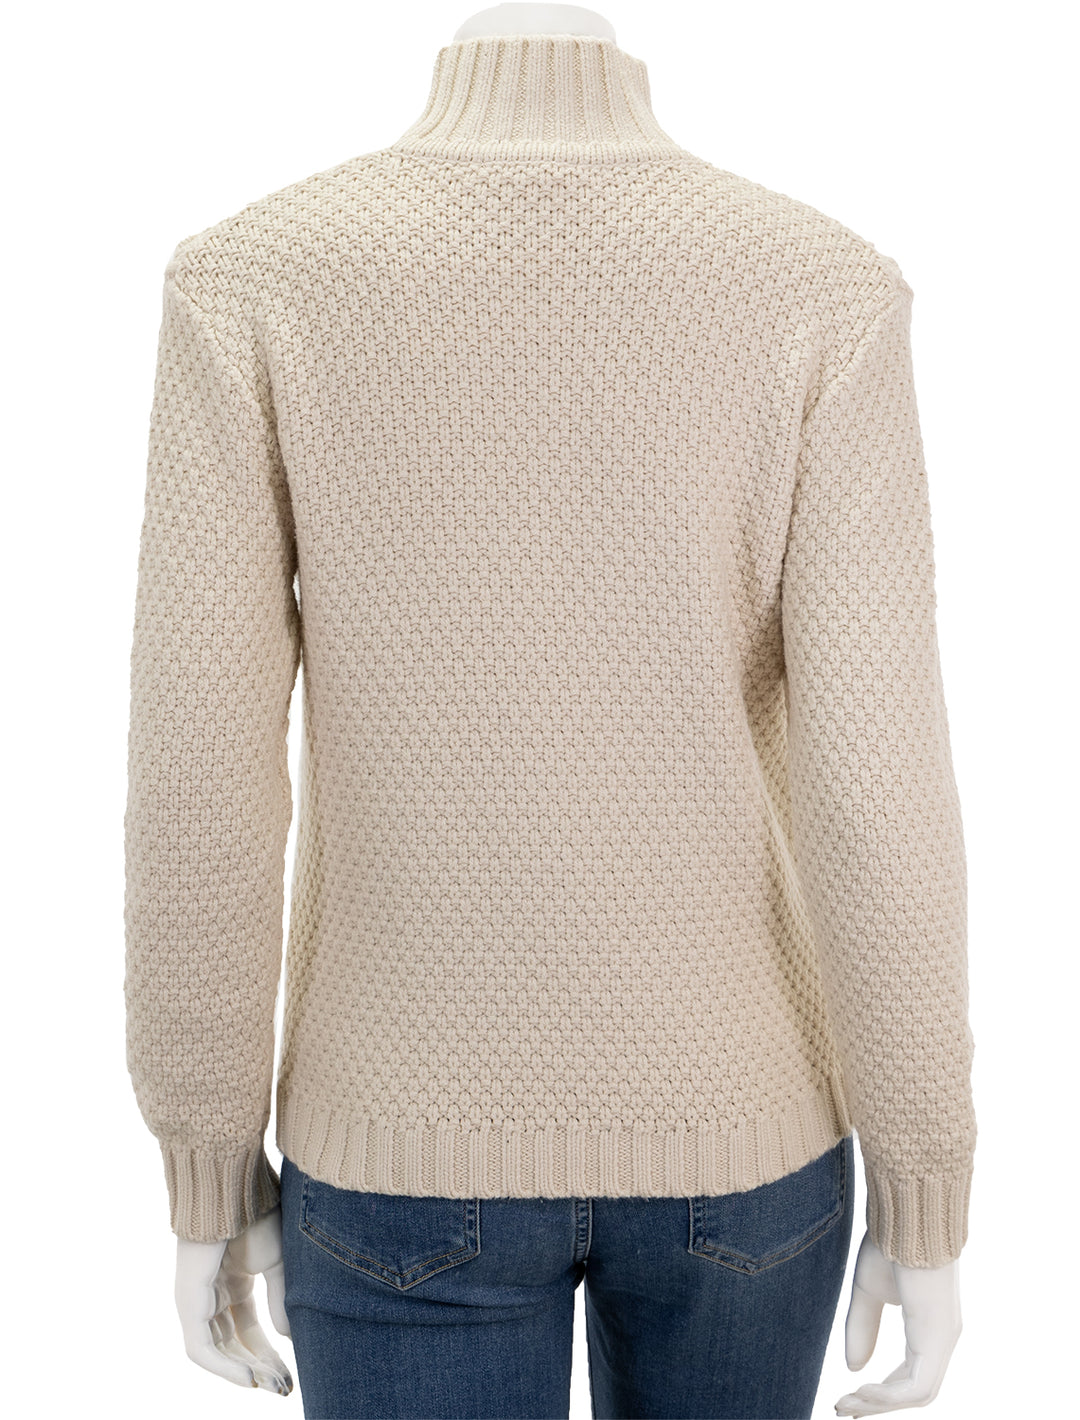 Back view of Splendid's maggie turtleneck sweater in white sand.